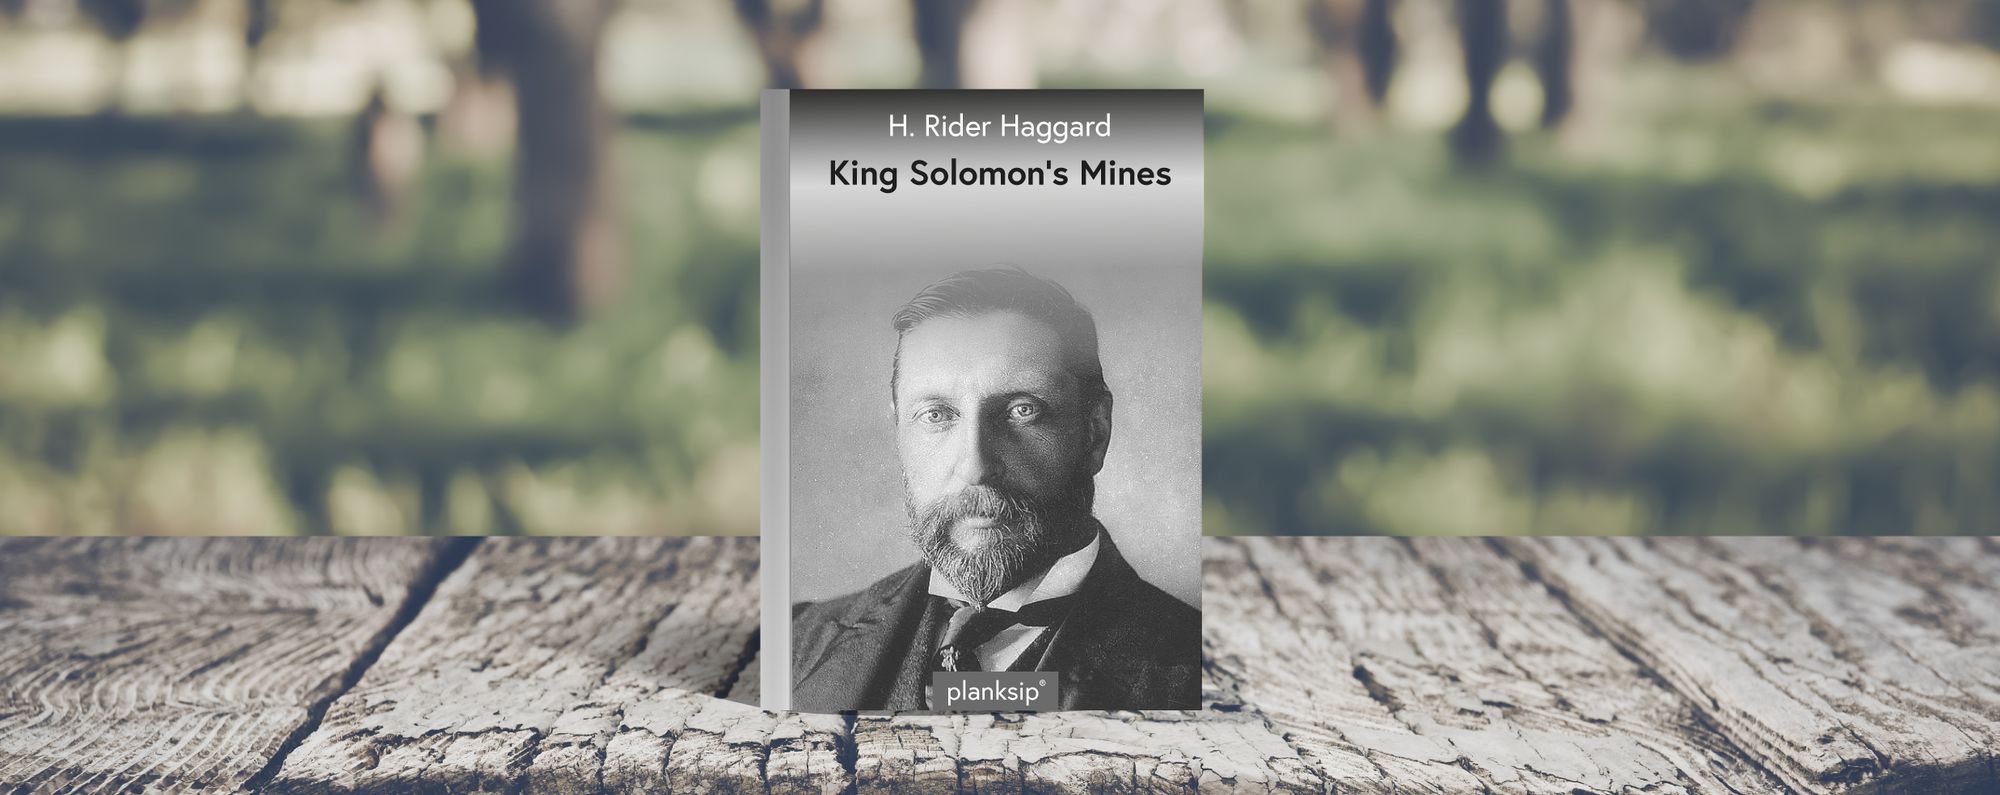 King Solomon's Mines by H. Rider Haggard (REVIEW)